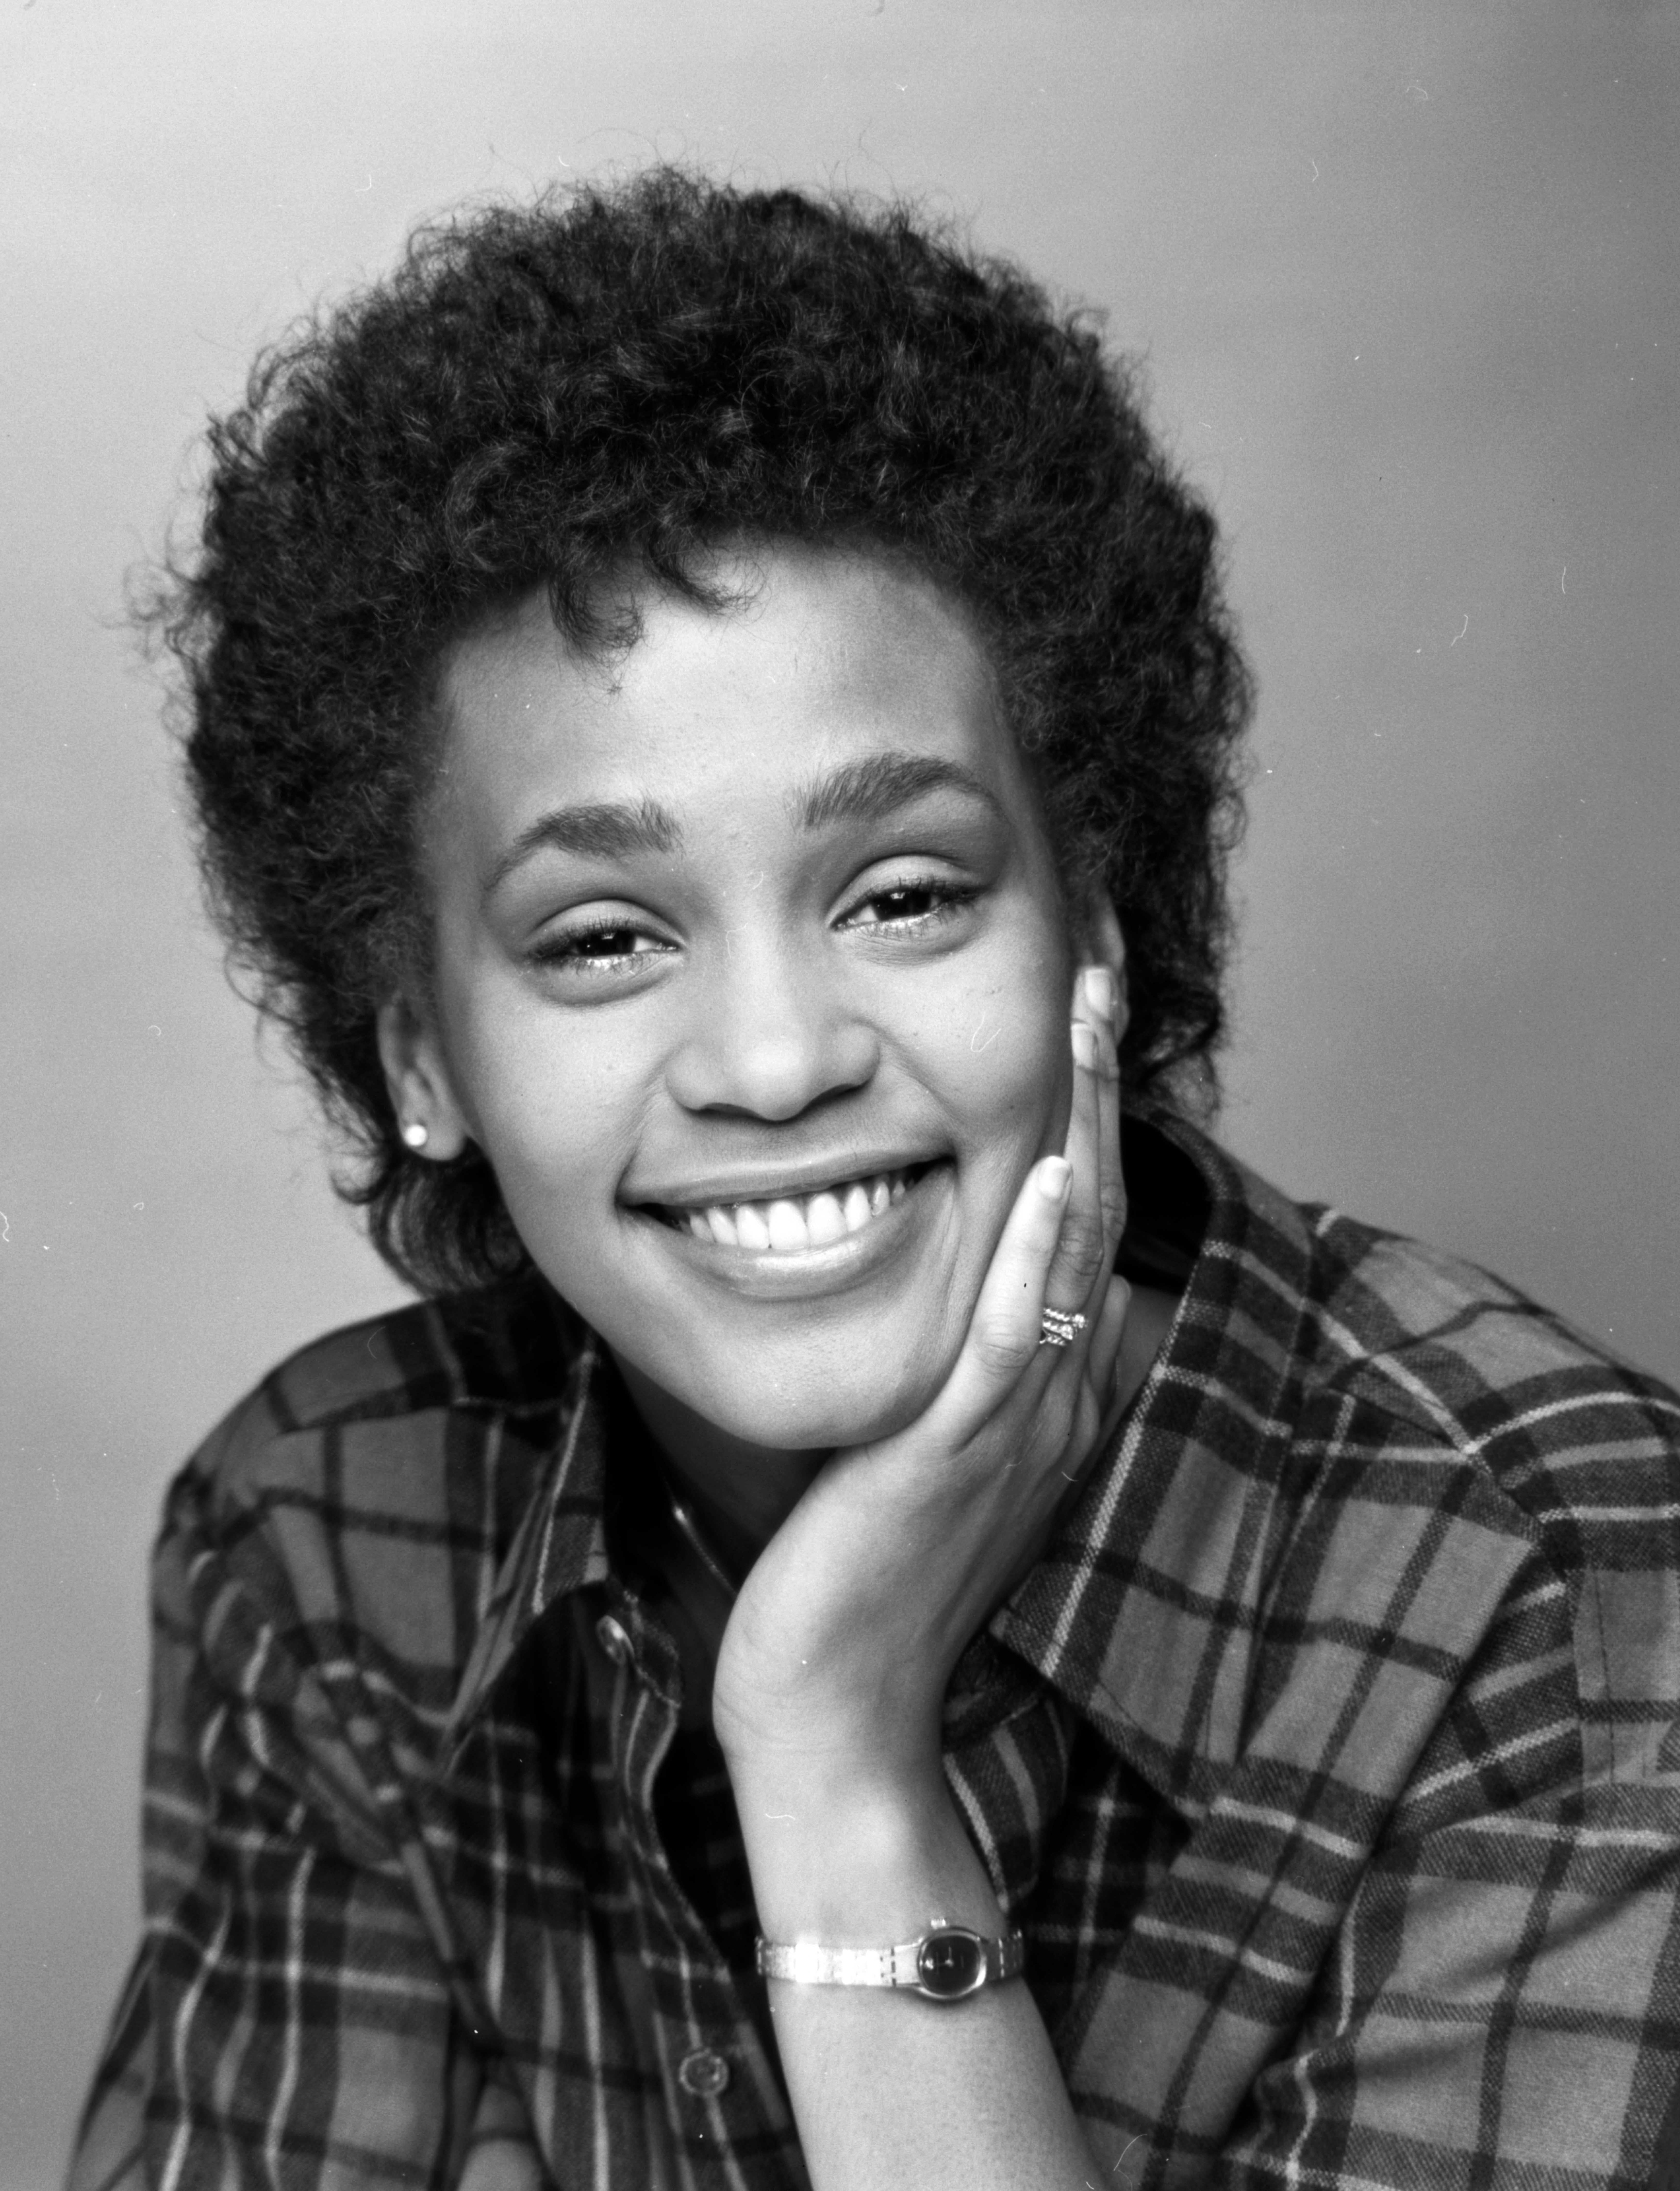 Jack Mitchell Black and White Photograph - Singer Whitney Houston when she was a senior in high school, first photo session